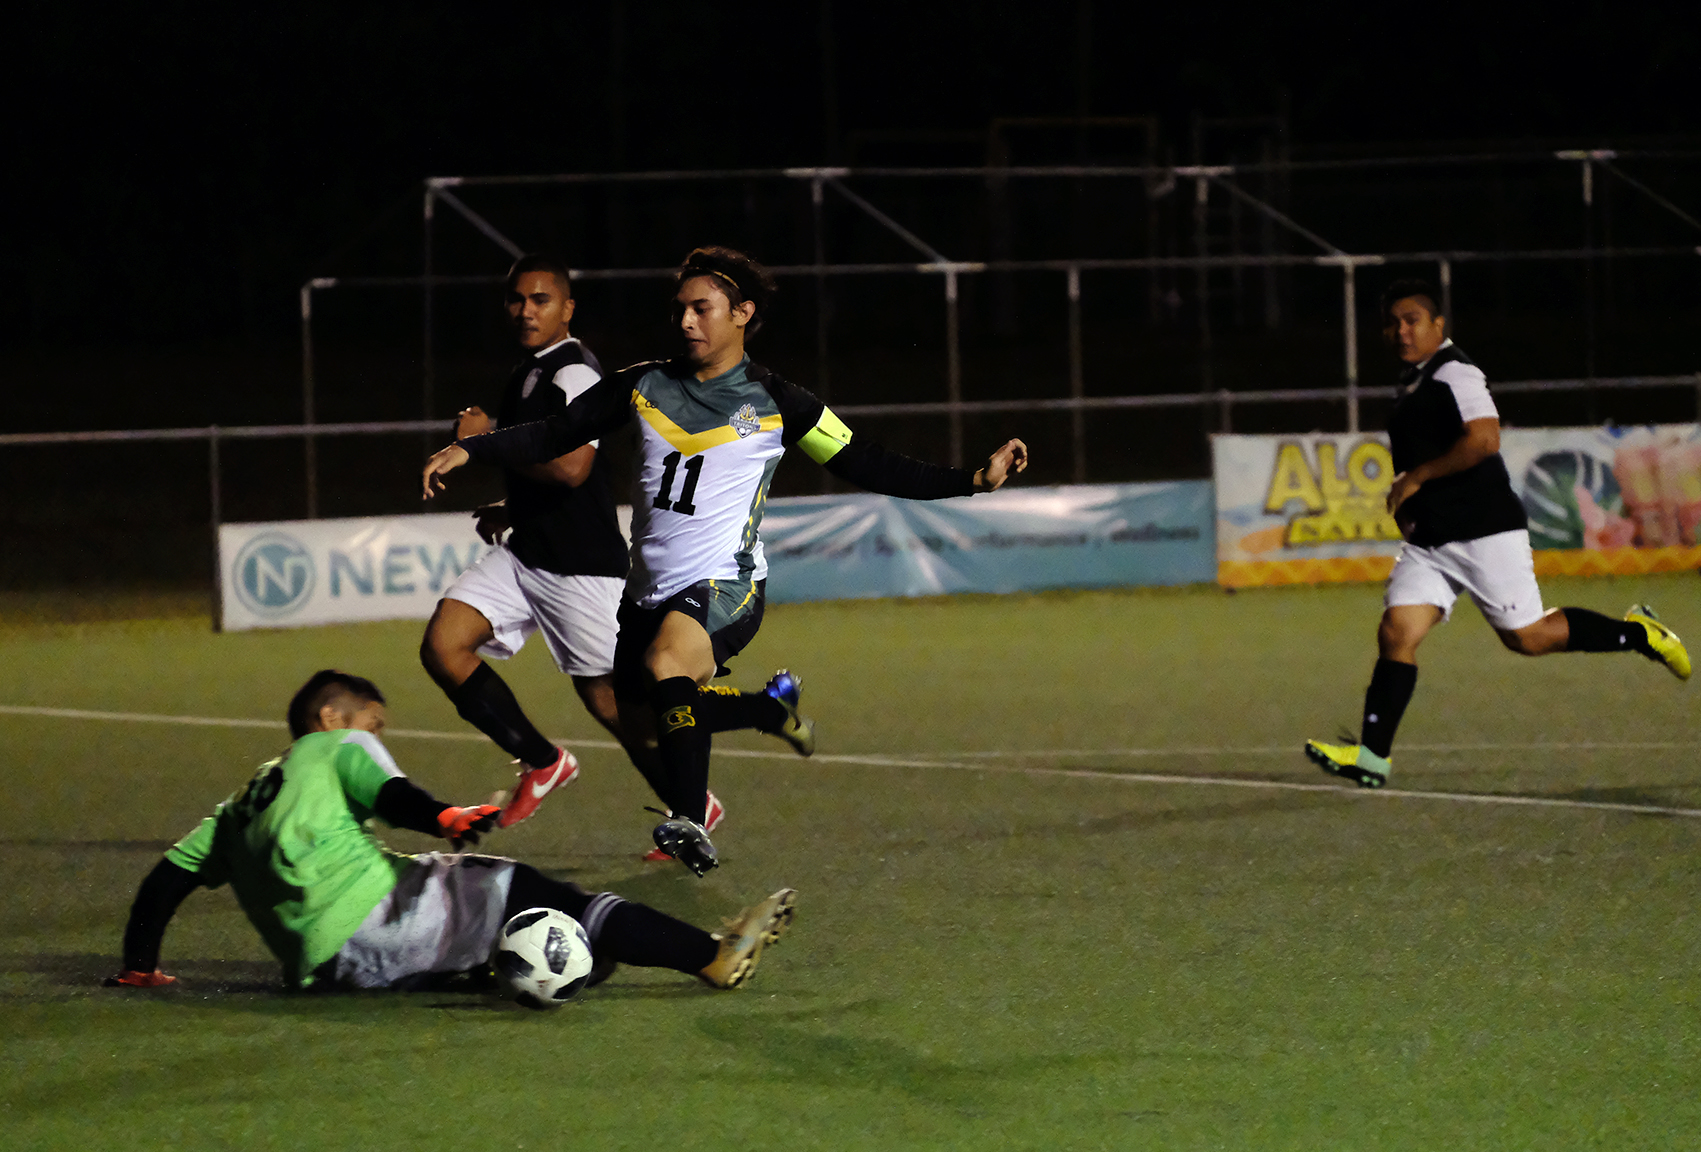 UOG's Dylan Naputi drives by the goalkeeper for a score